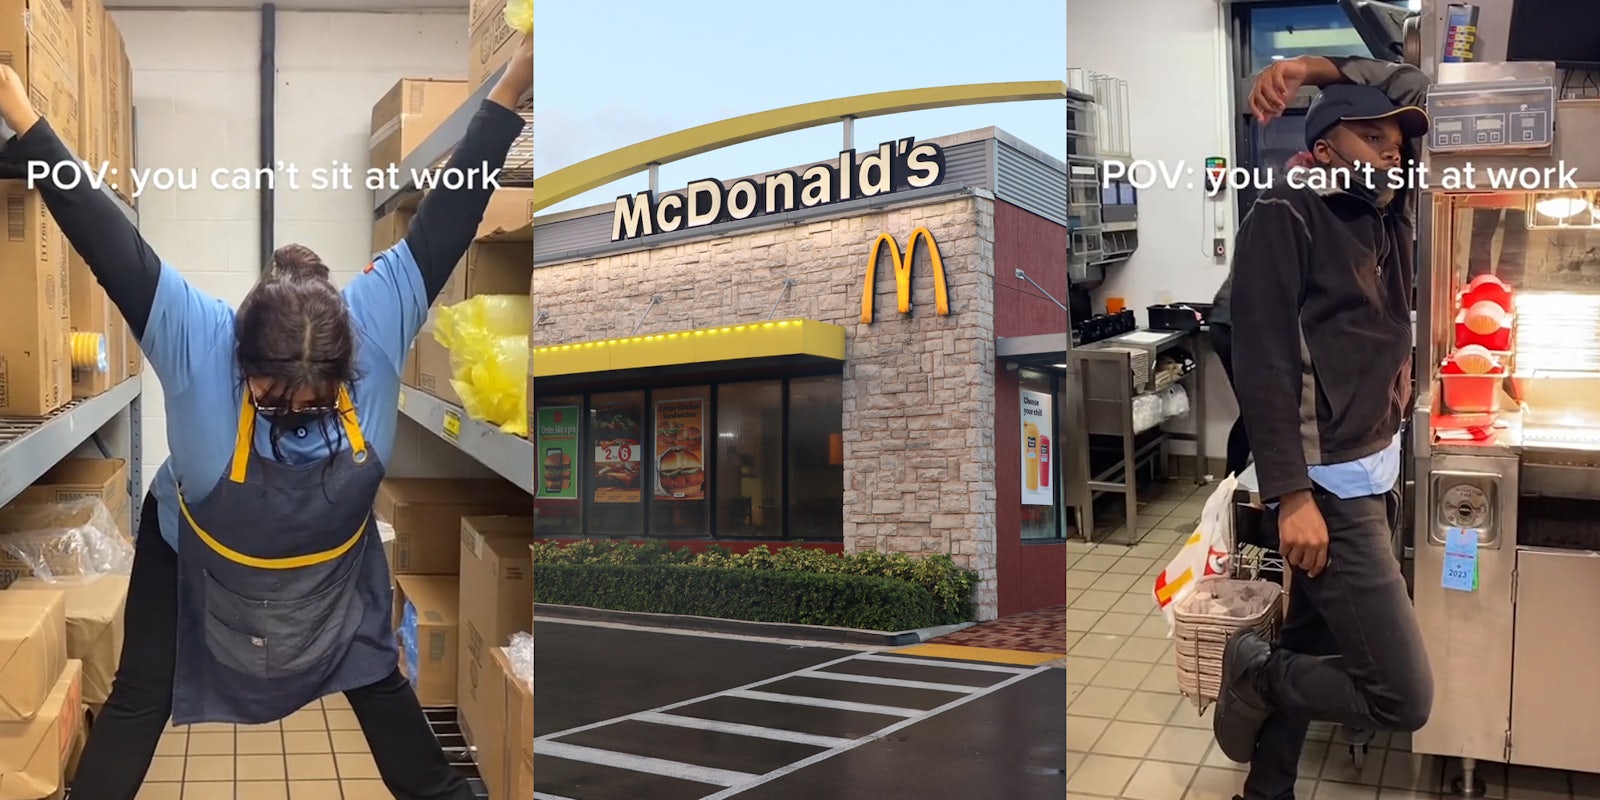 McDonald's employee standing with arms and legs out with caption 'POV: you can't sit at work' (l) McDonald's building with sign (c) McDonald's employee standing with arm up leaning with caption 'POV: you can't sit at work' (r)